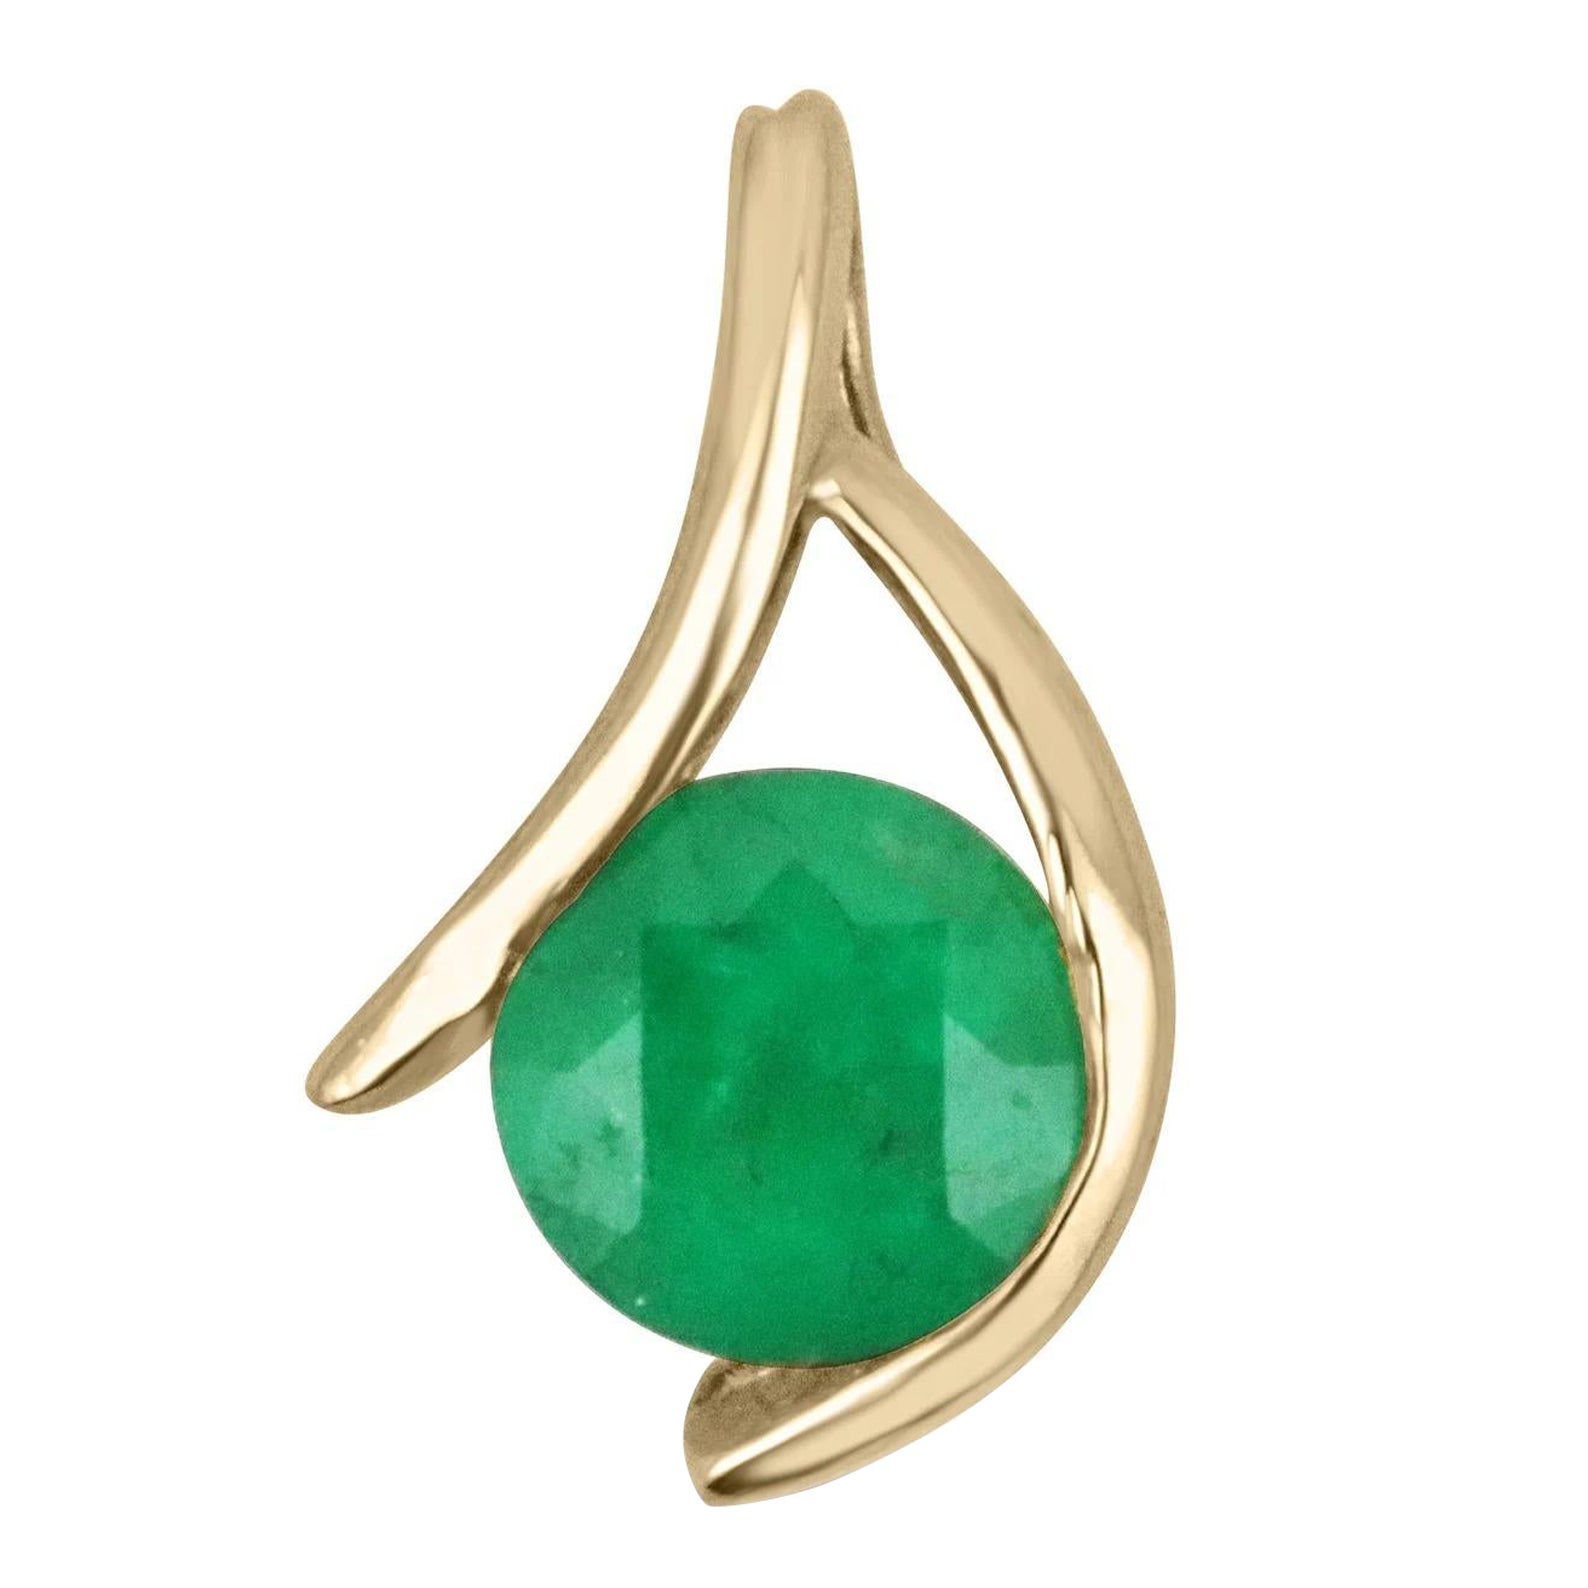 2.0 Carat Colombian Emerald-Round Cut Kanji Shaped Solitaire Pendant Gold 14K For Sale